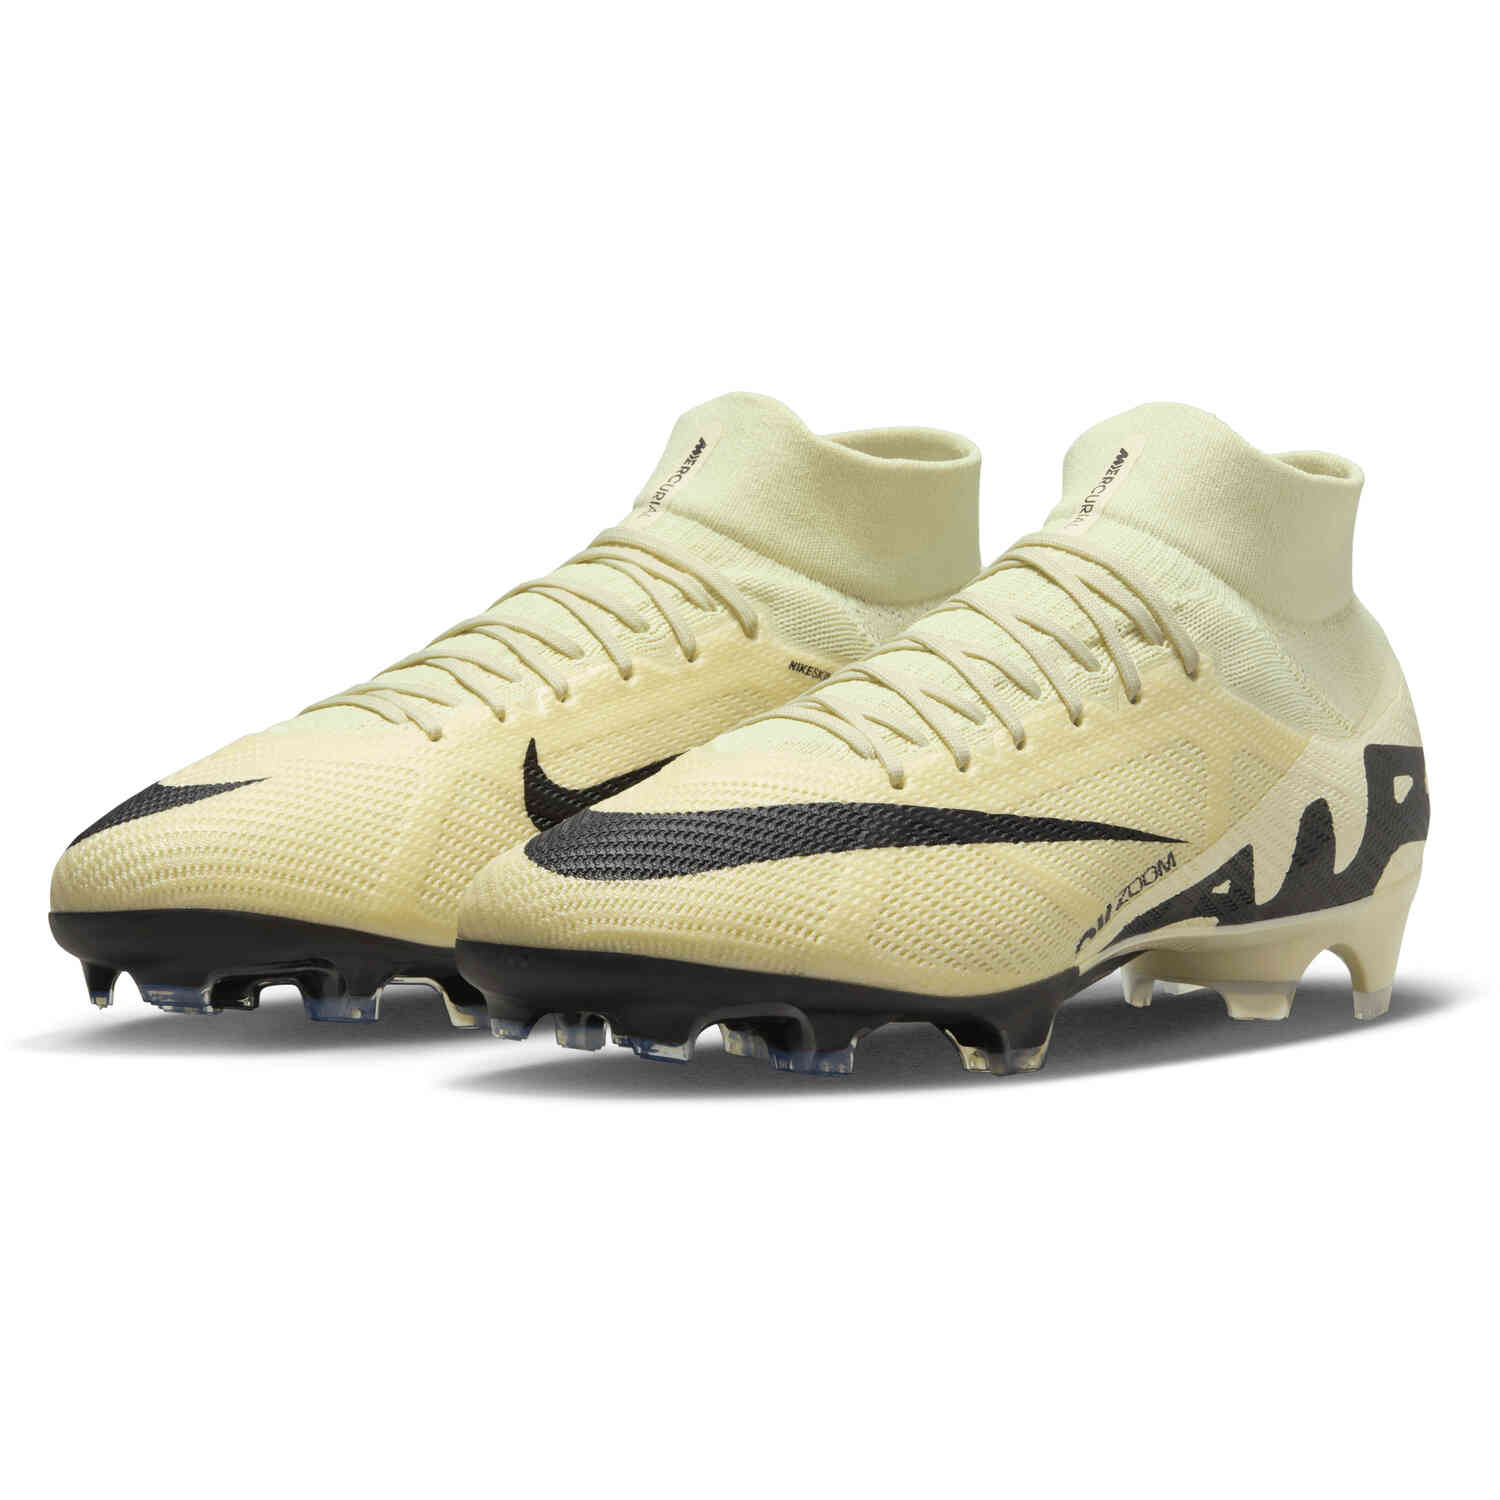 Nike Mercurial Superfly 9 Pro FG Firm Ground - Mad Ready Pack - SoccerPro